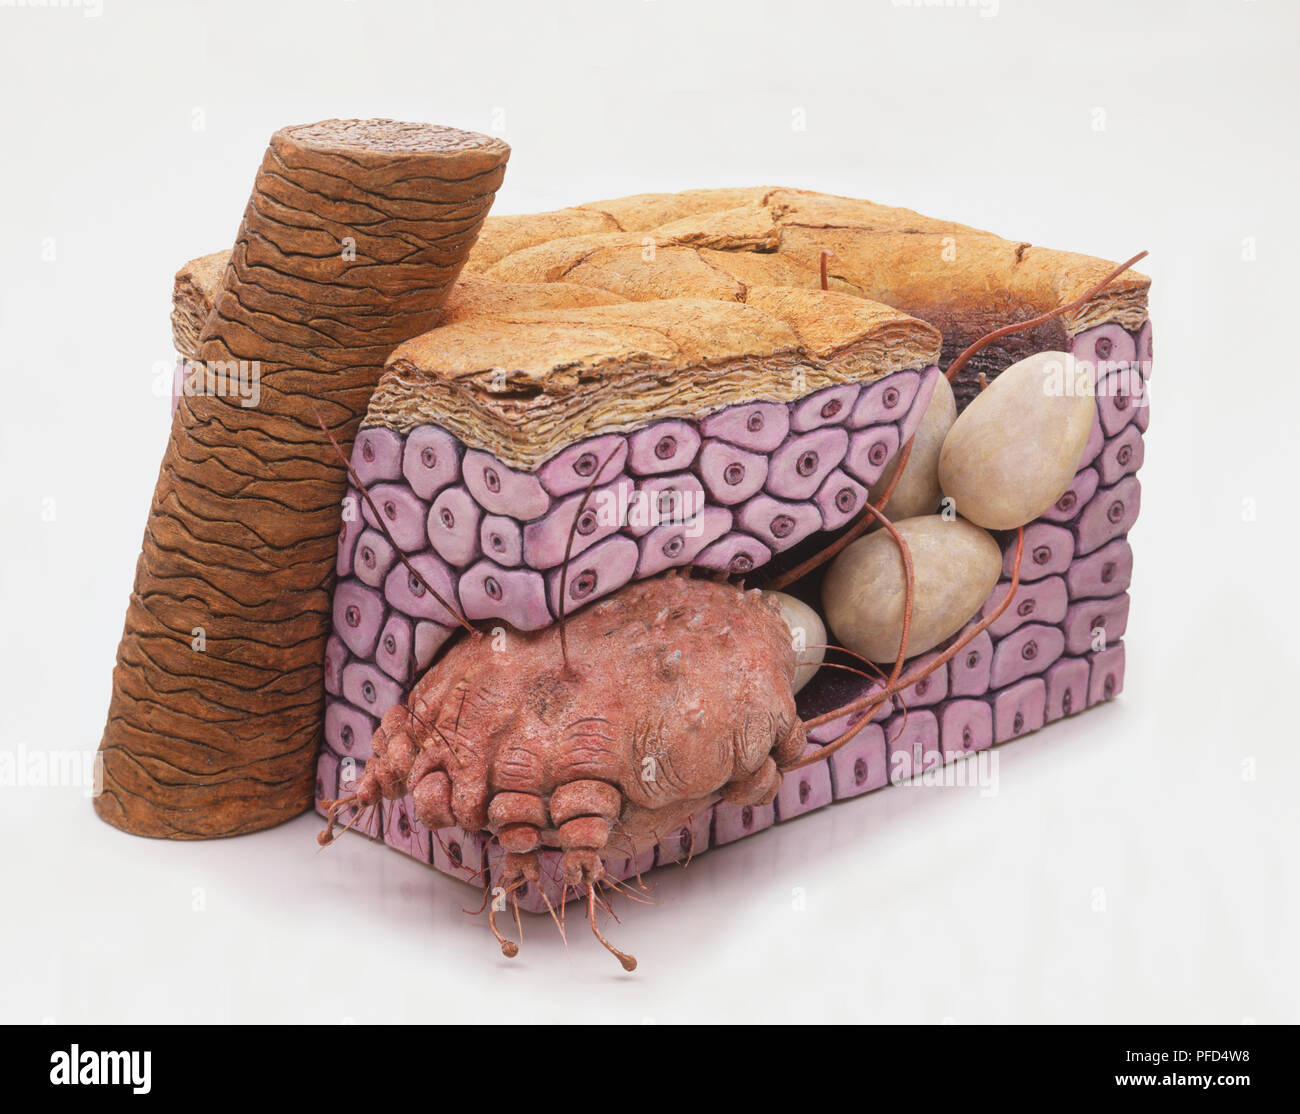 Cross-section model of Bedbug (Cimicidae) burrowed in skin, laying eggs. Stock Photo